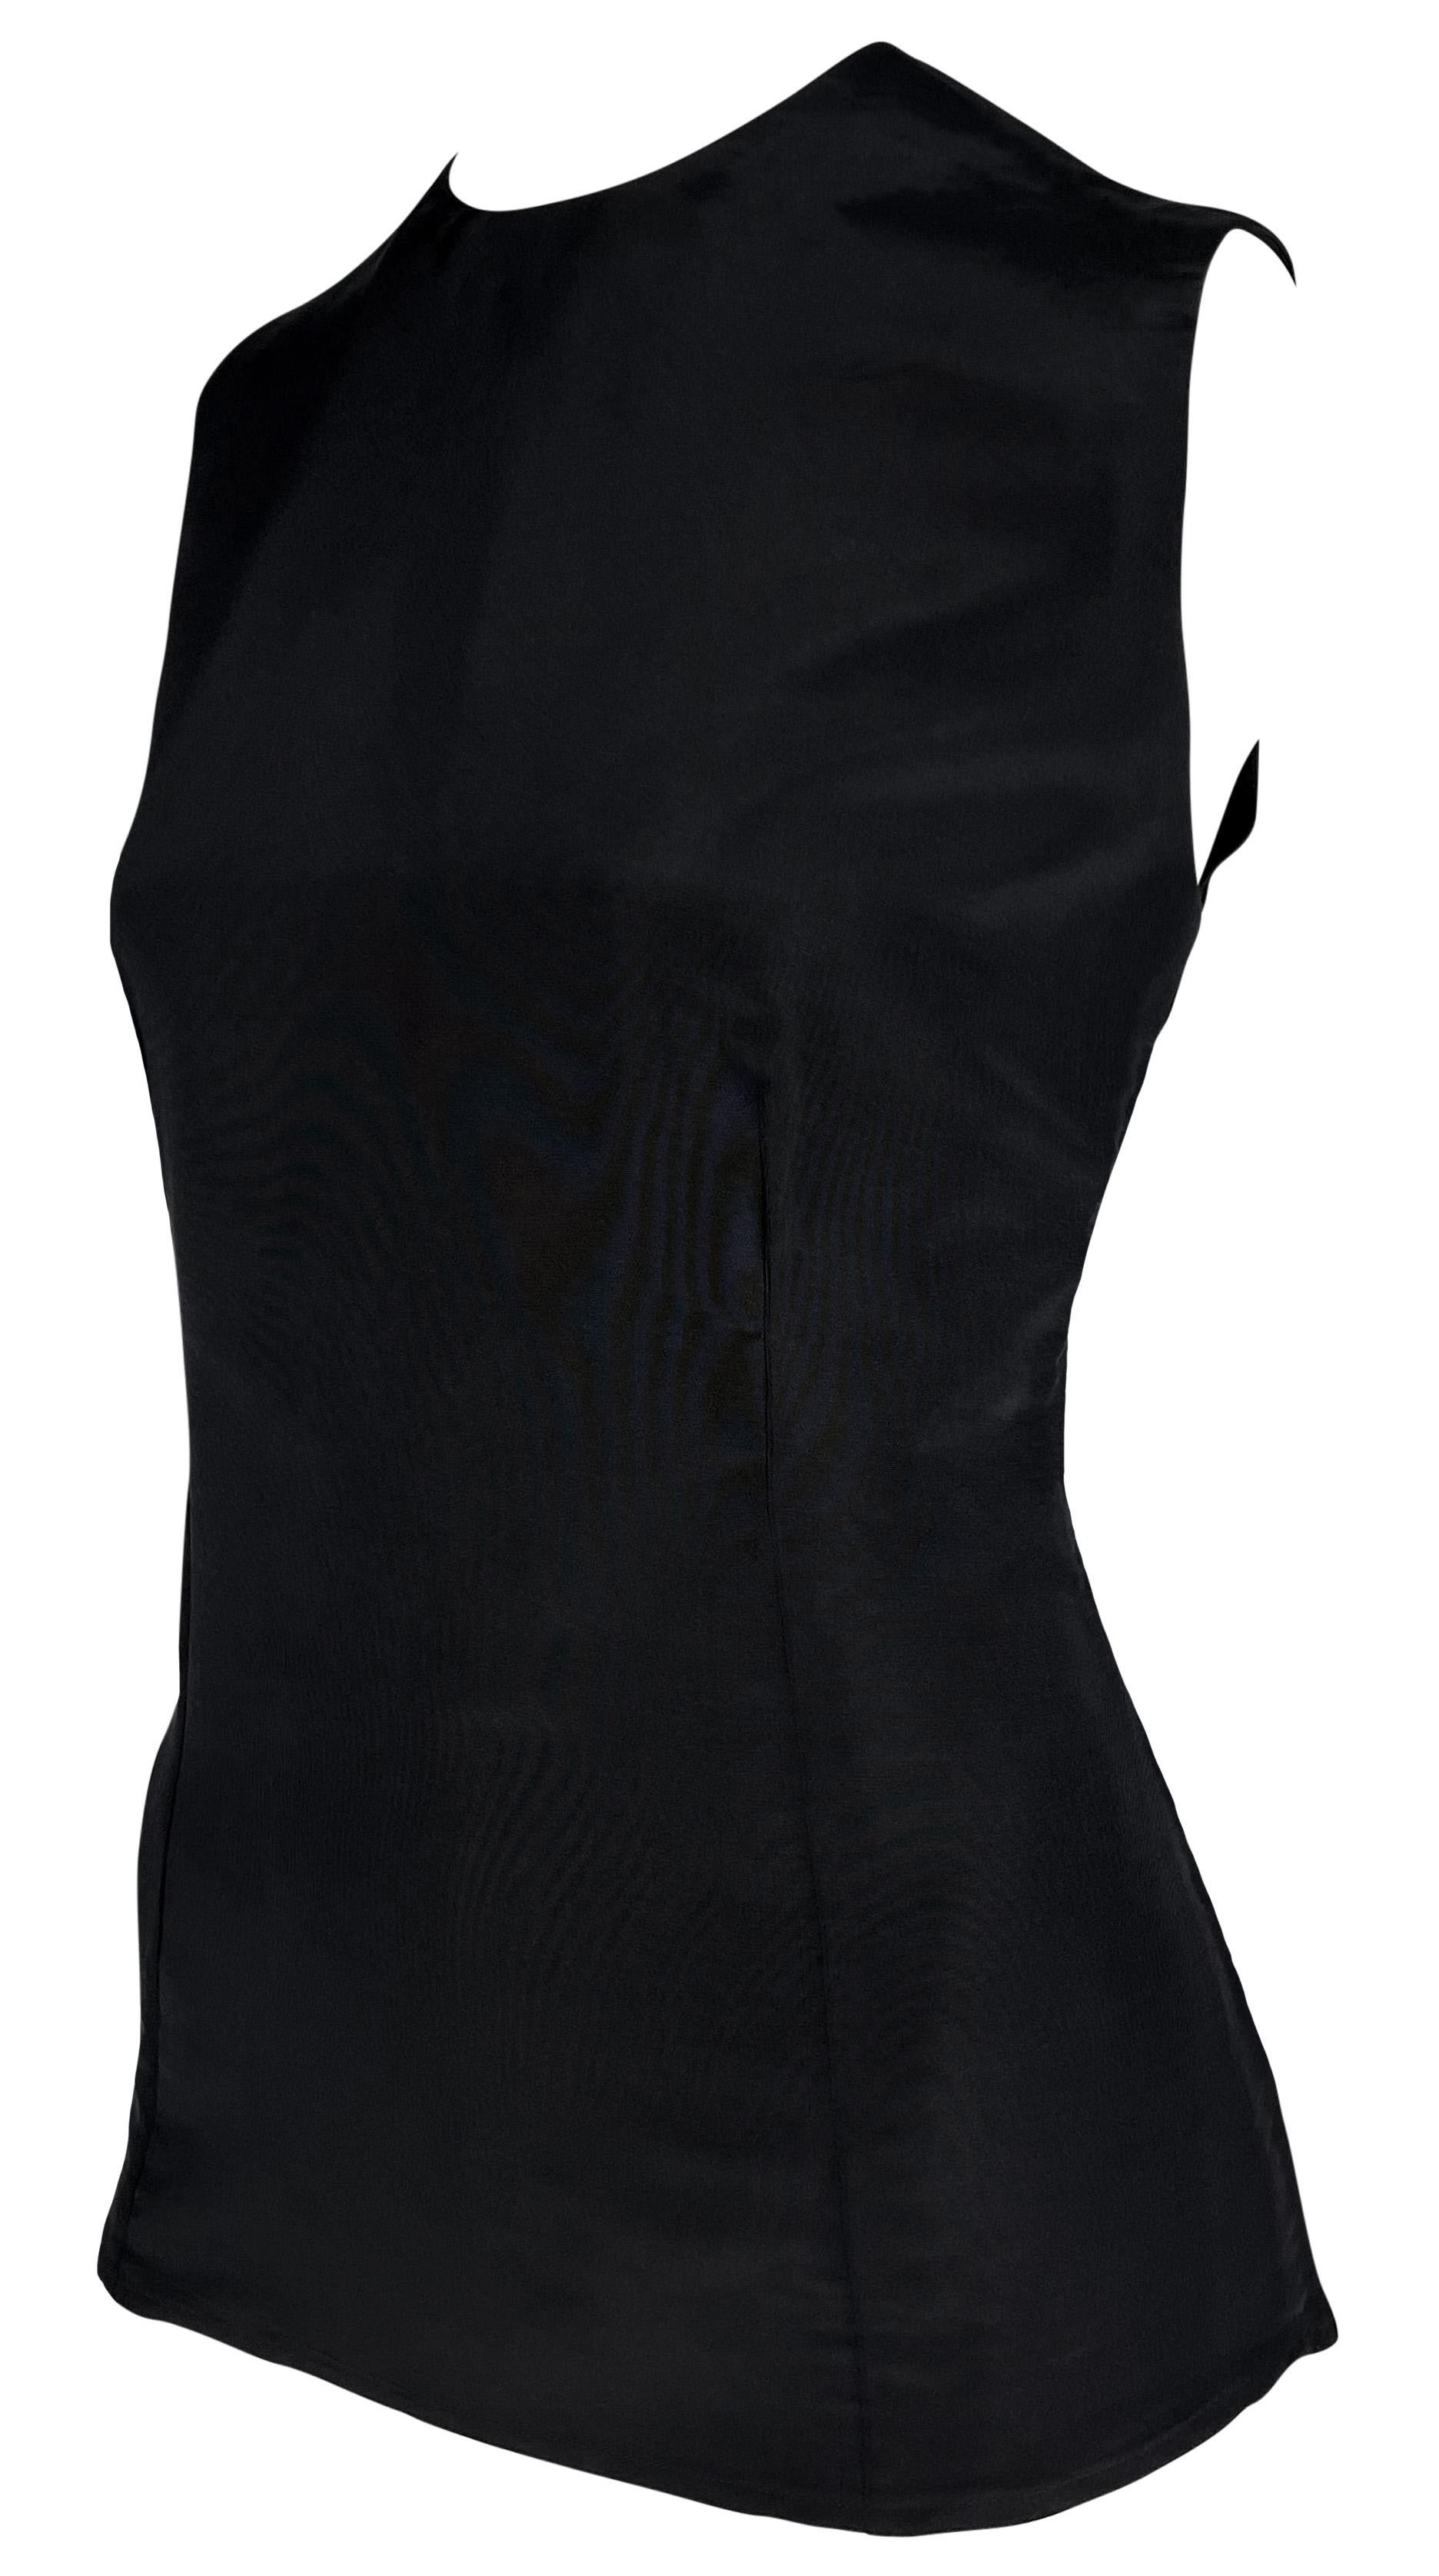 From the Spring/Summer 1990 collection, this Gianni Versace black silk sleeveless top is the perfect elevated essential. 

Approximate measurements:
Size - 42IT
Shoulder to hem: 24